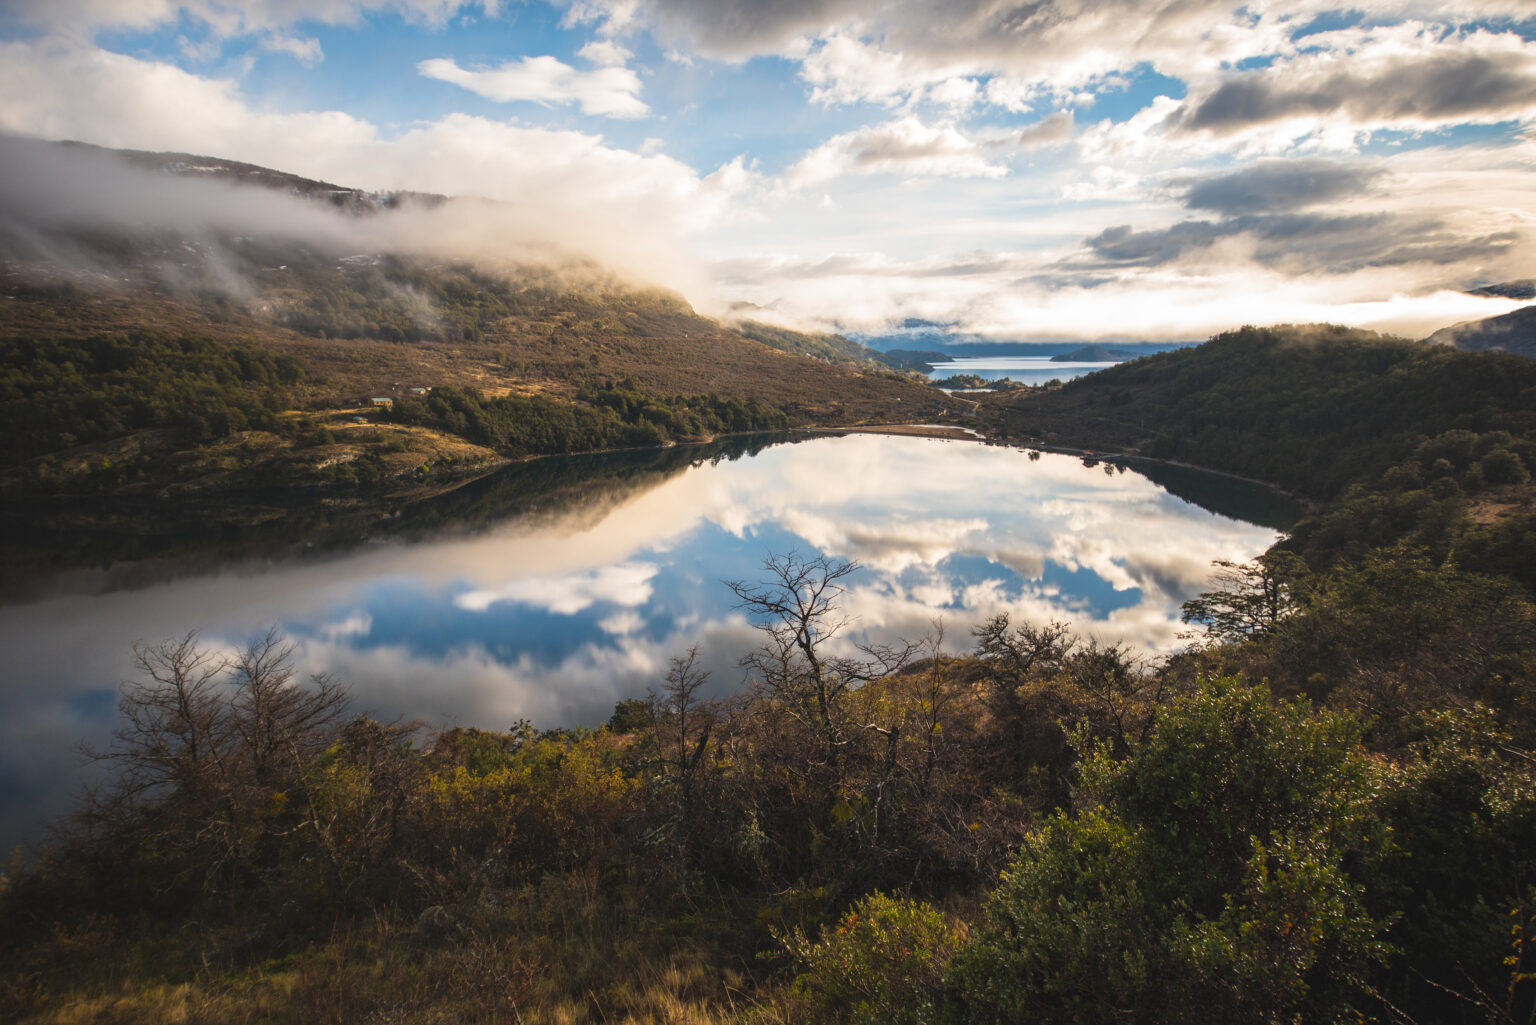 Patagonian lake surrounded by hills with clouds mirroring on the water